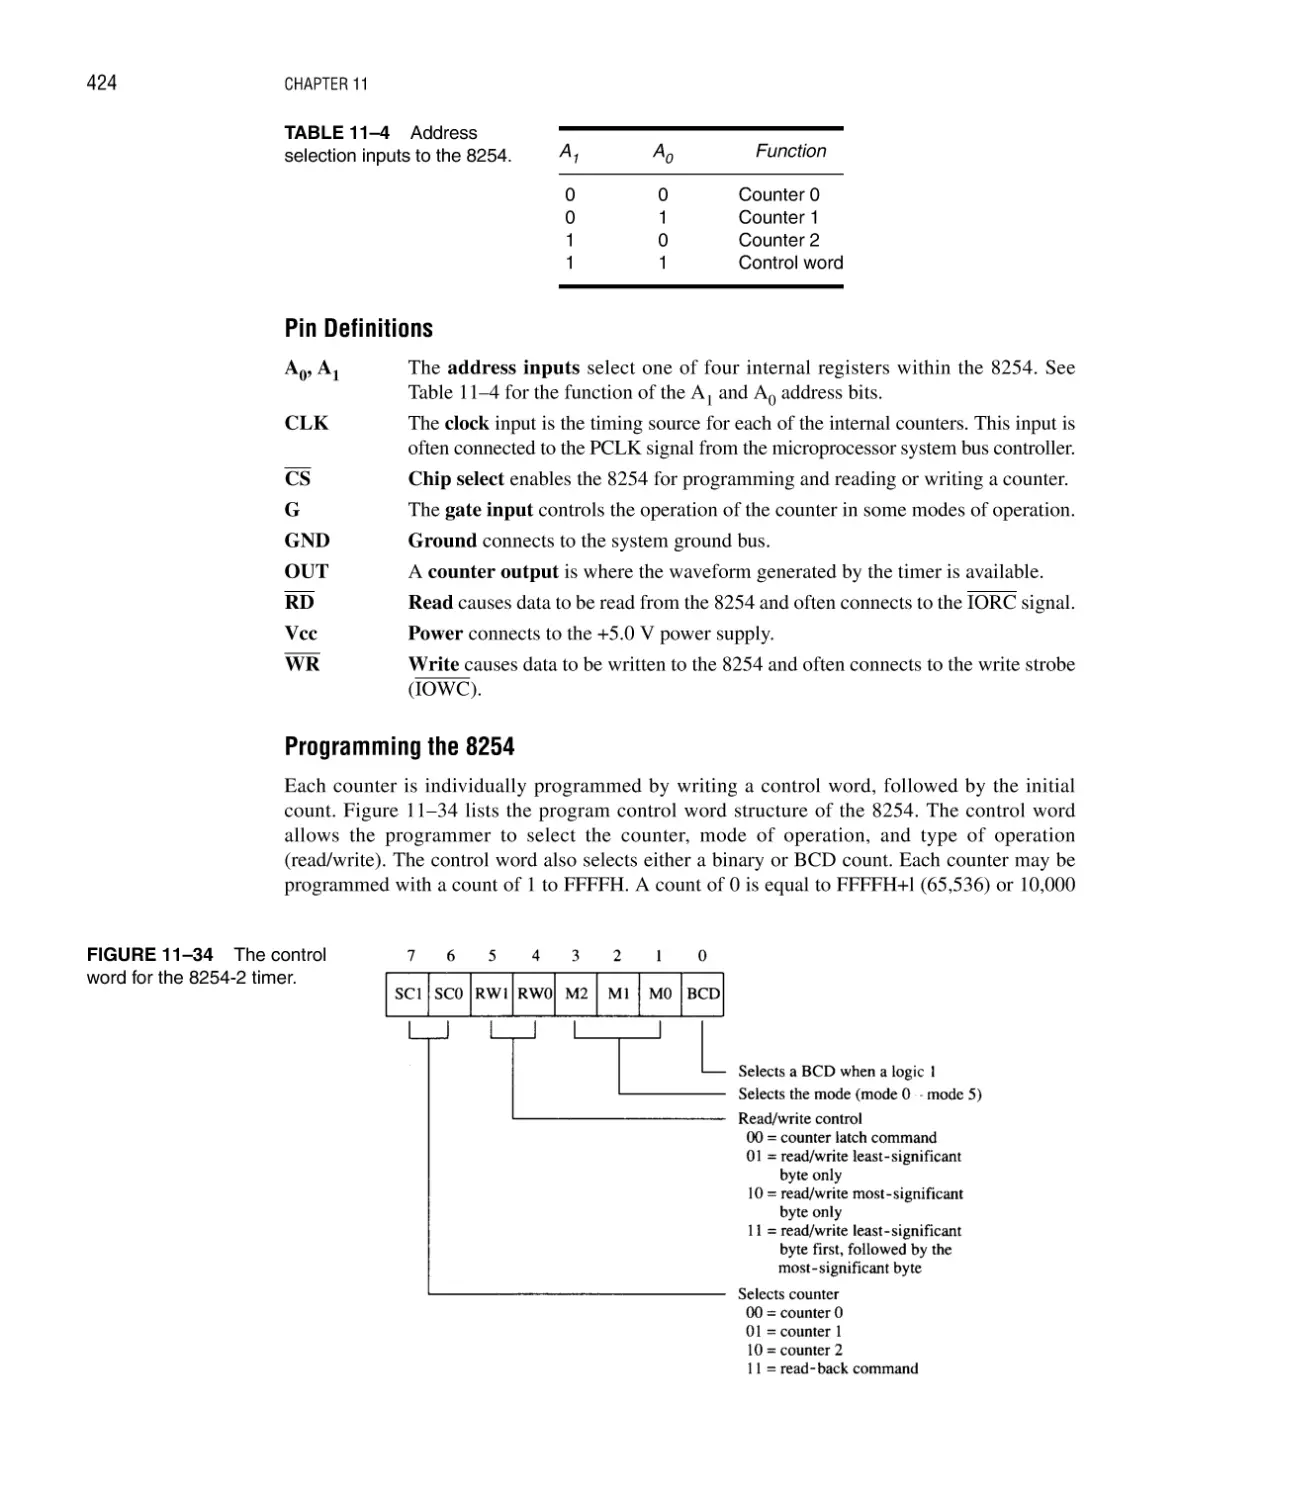 Pin Definitions
Programming the 8254